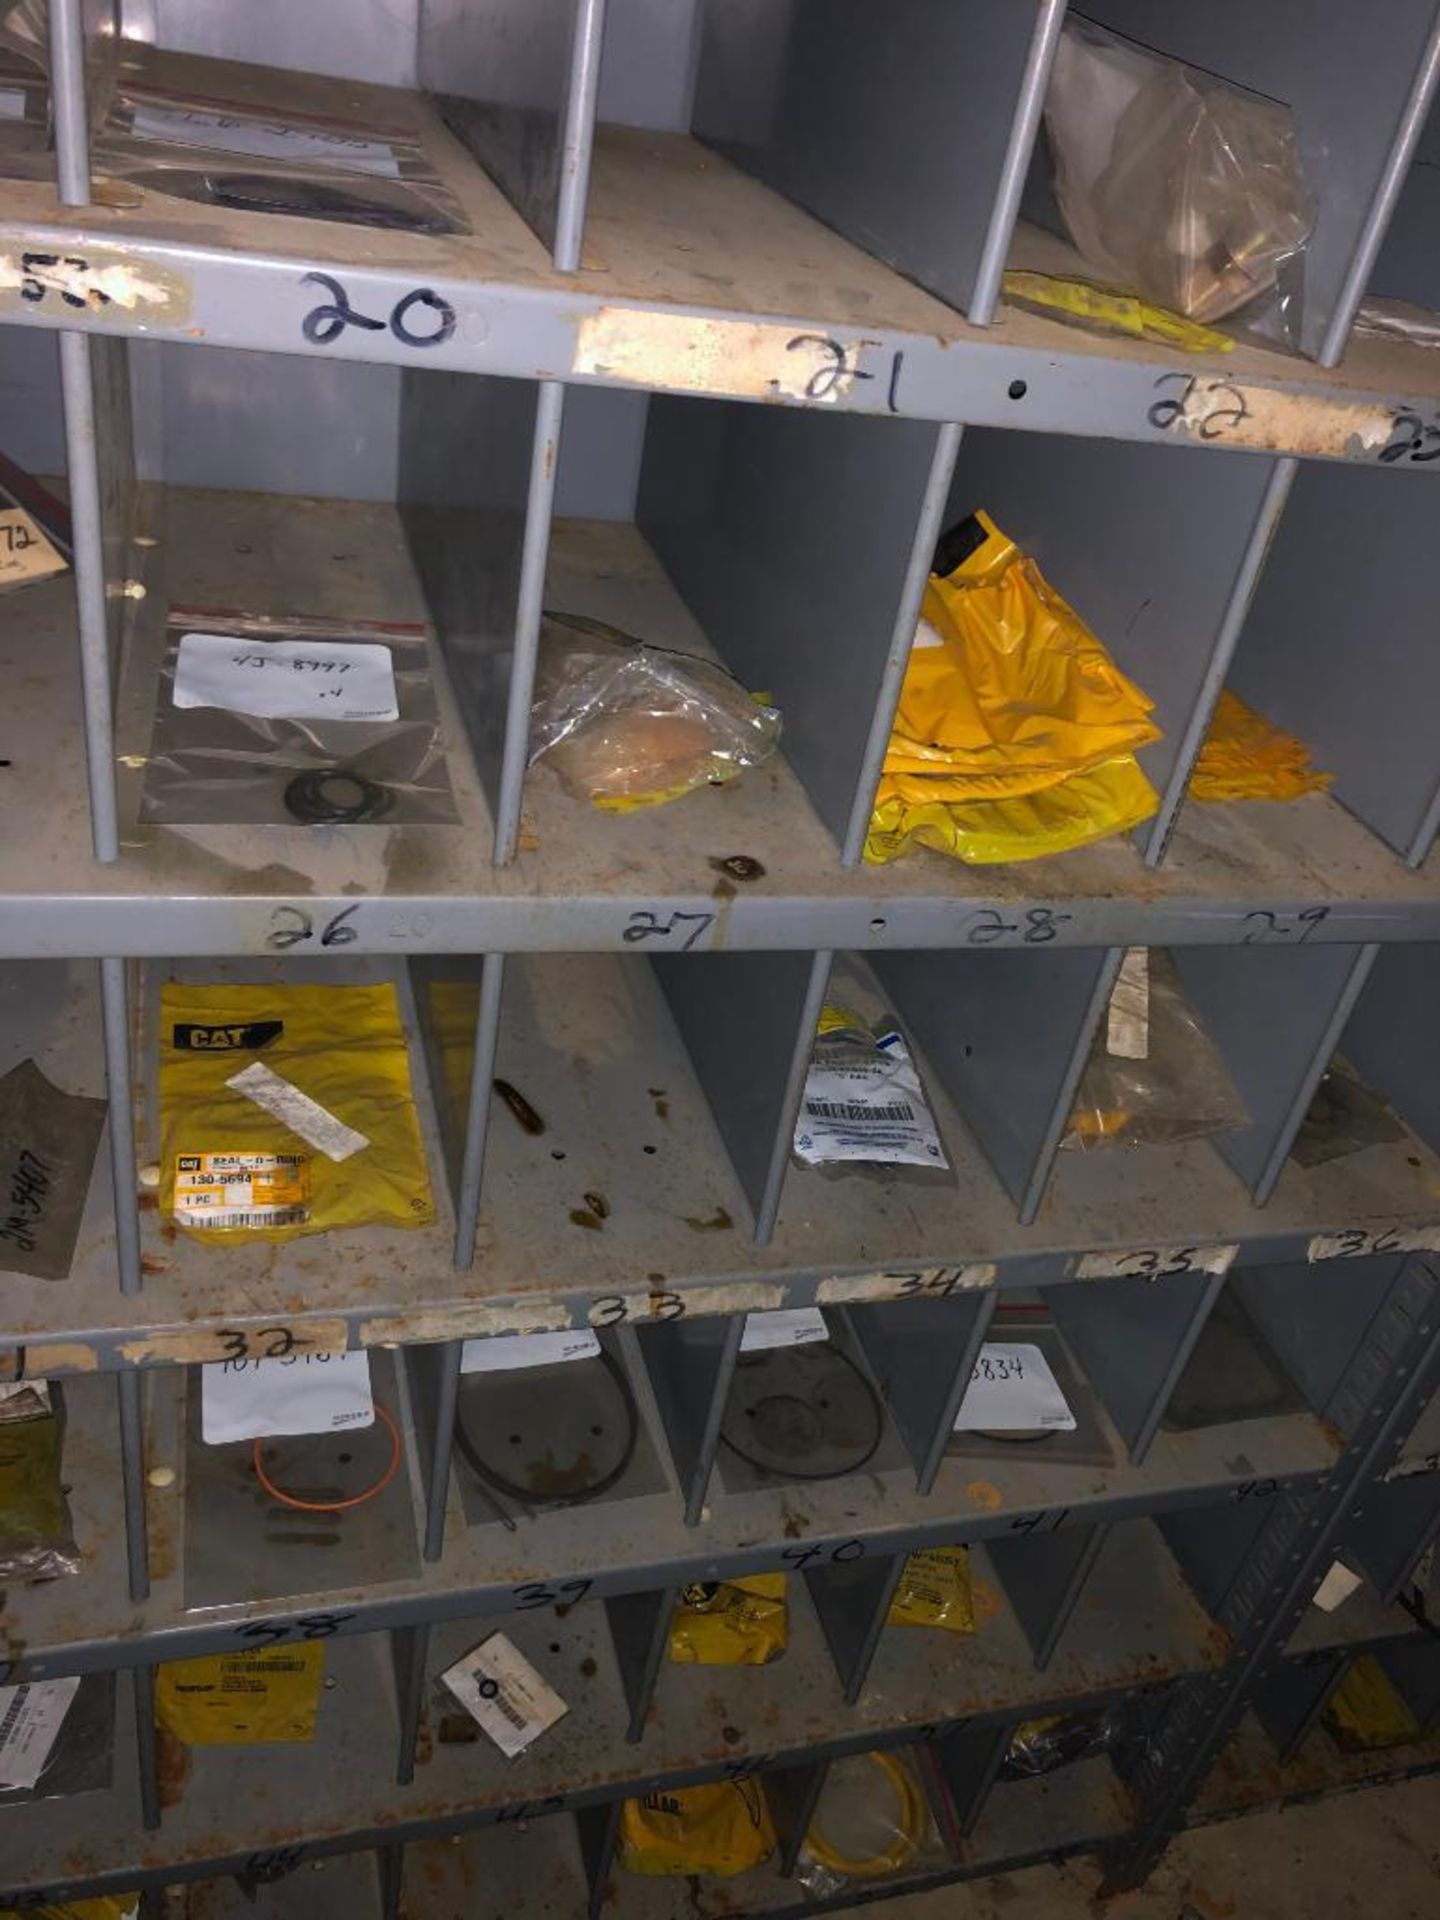 (5) ROWS OF SHELVES W/ DIVIDERS & PIGEON HOLES, SOME CONSISTING OF NEW CATERPILLAR SURPLUS - Image 8 of 25